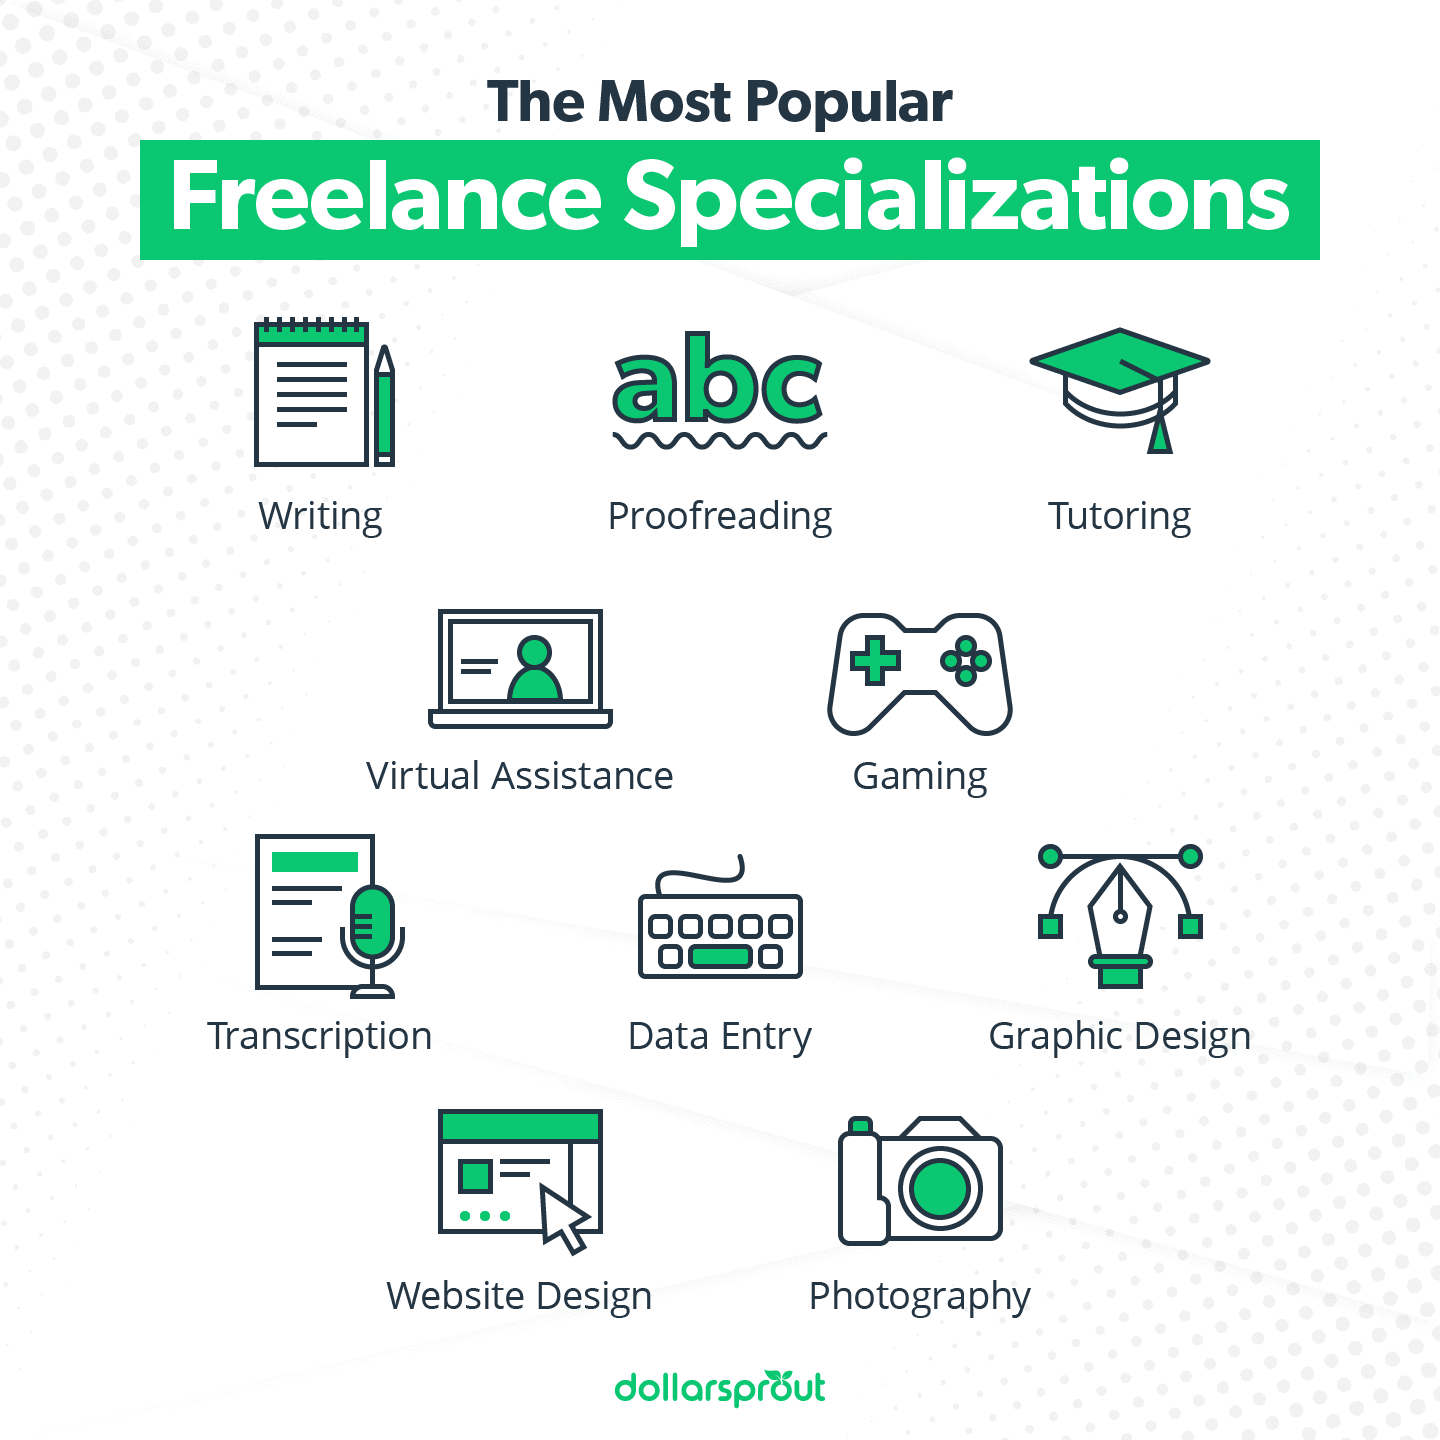 The Ultimate Guide to Finding High-Paying Freelance Gigs